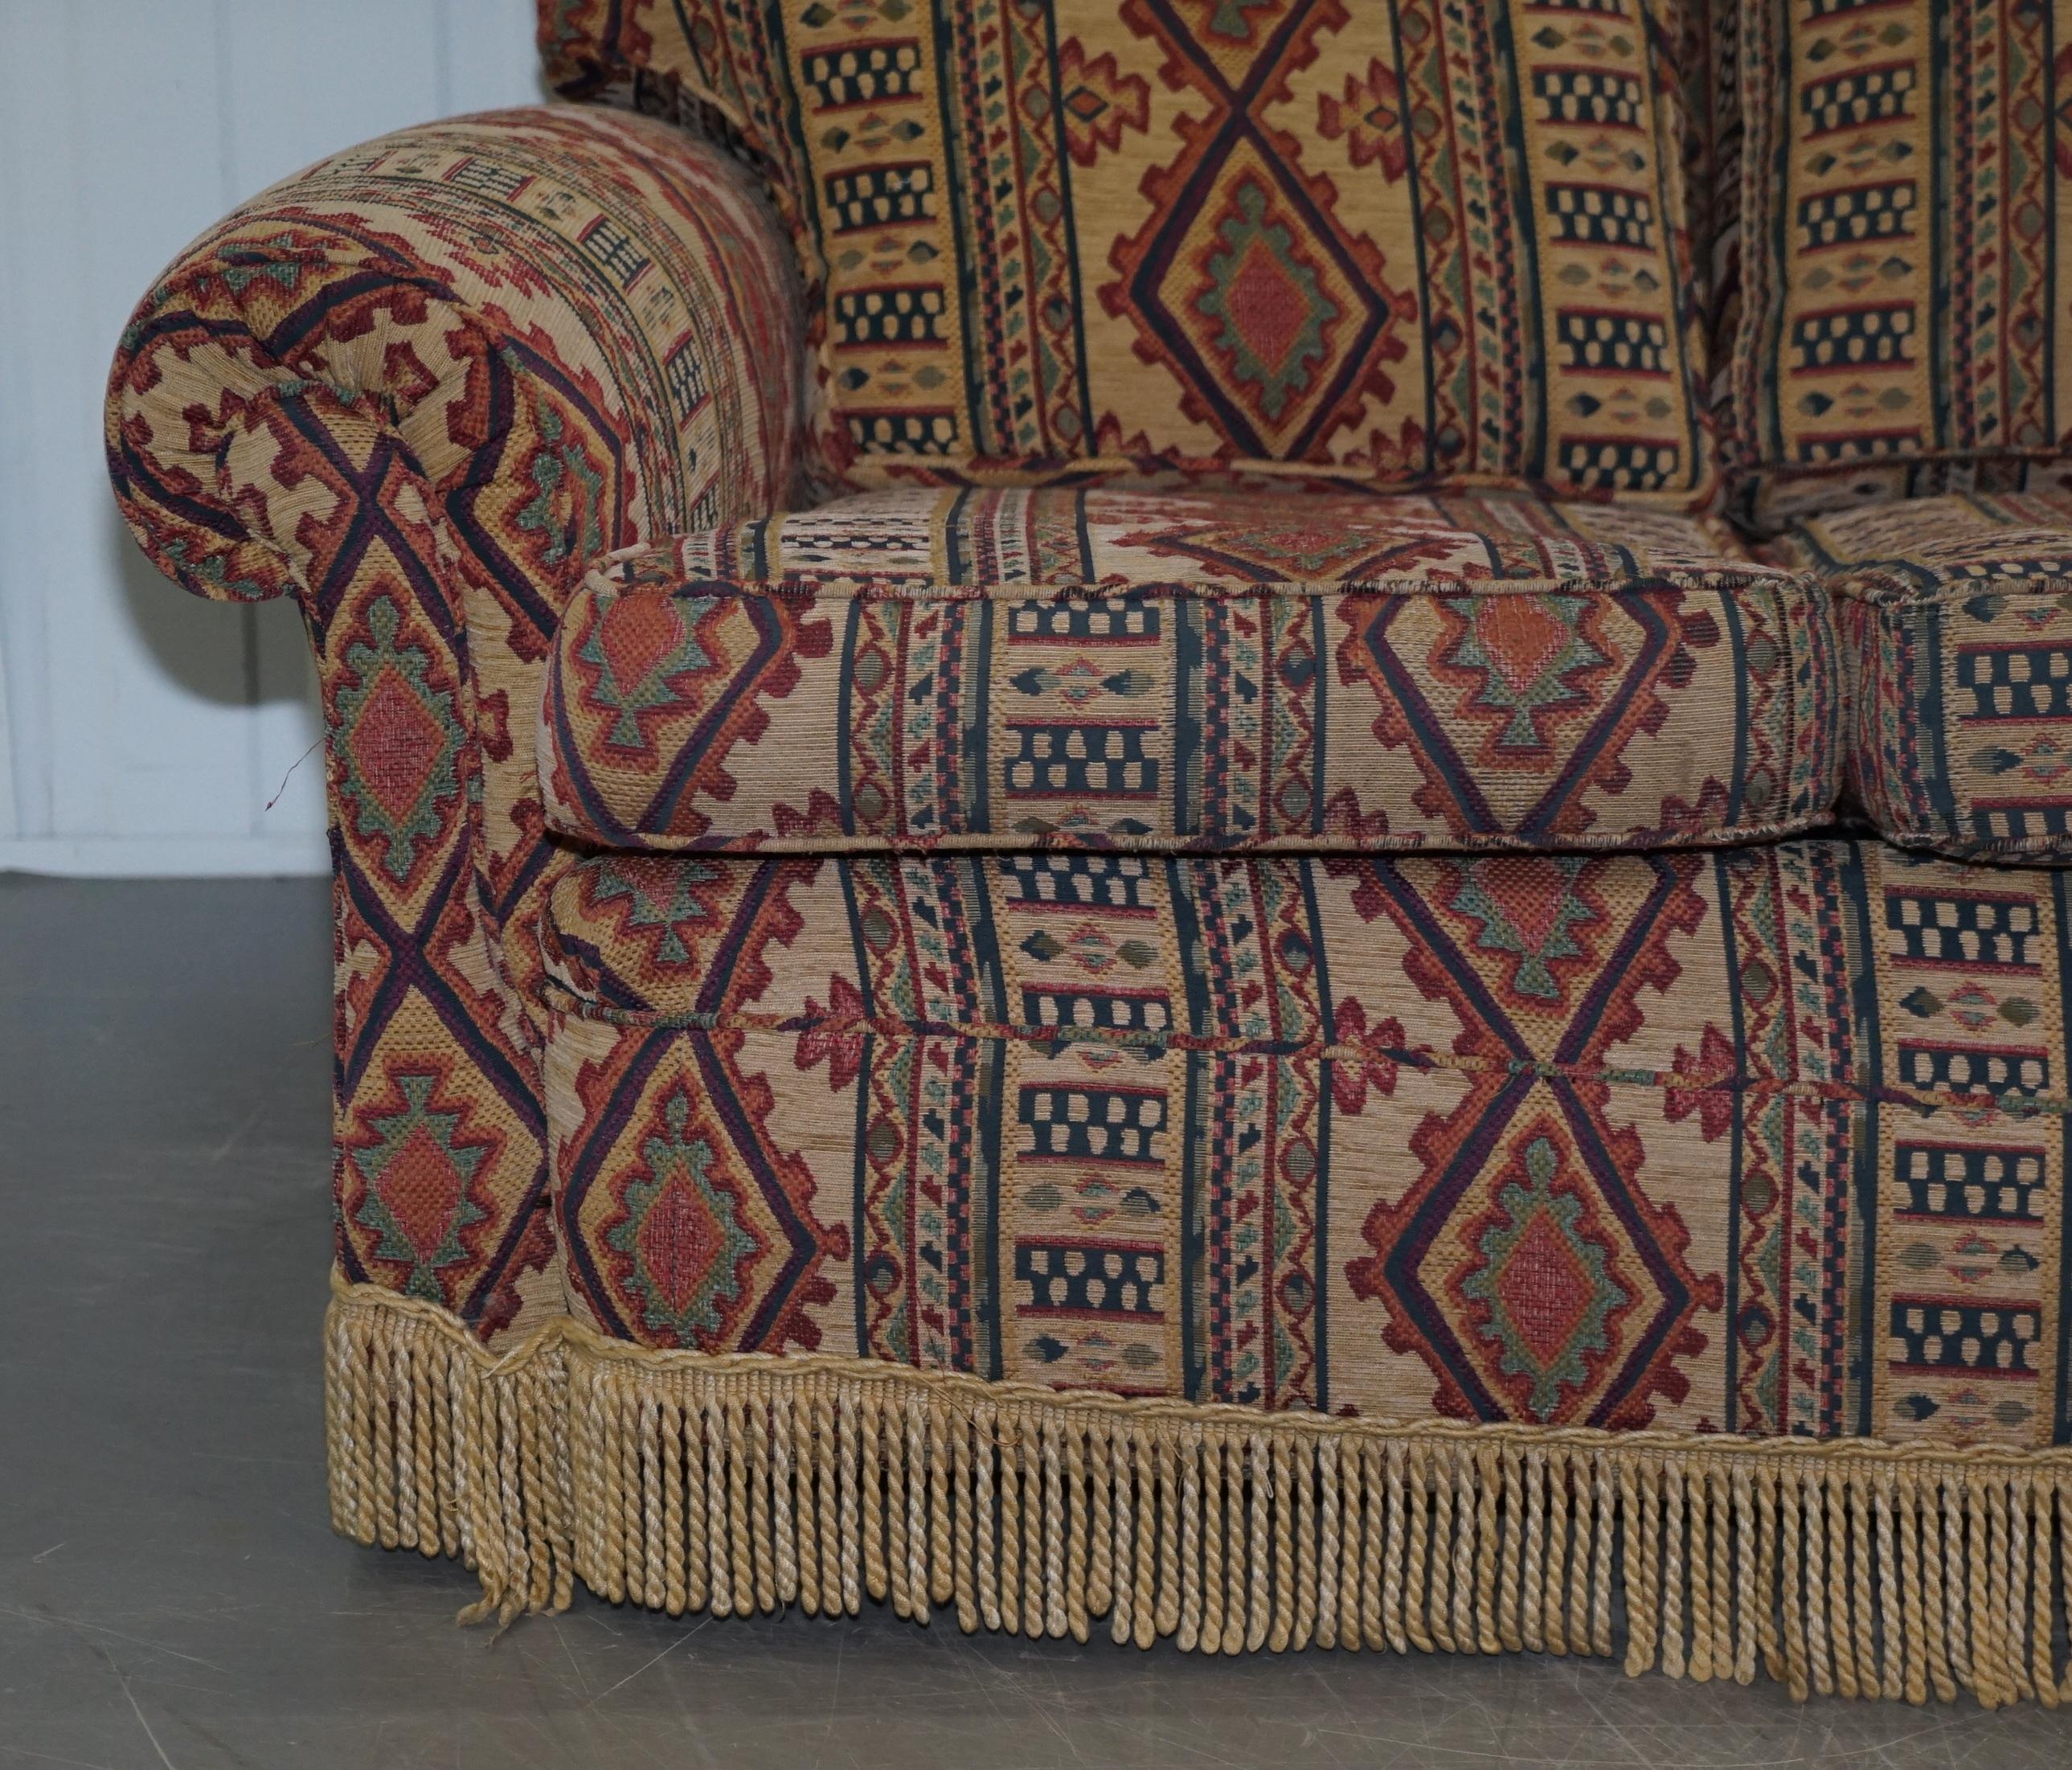 Midcentury Fully Sprung Art Deco Style Kilim Rug Upholstered Sofa Part of Suite For Sale 3